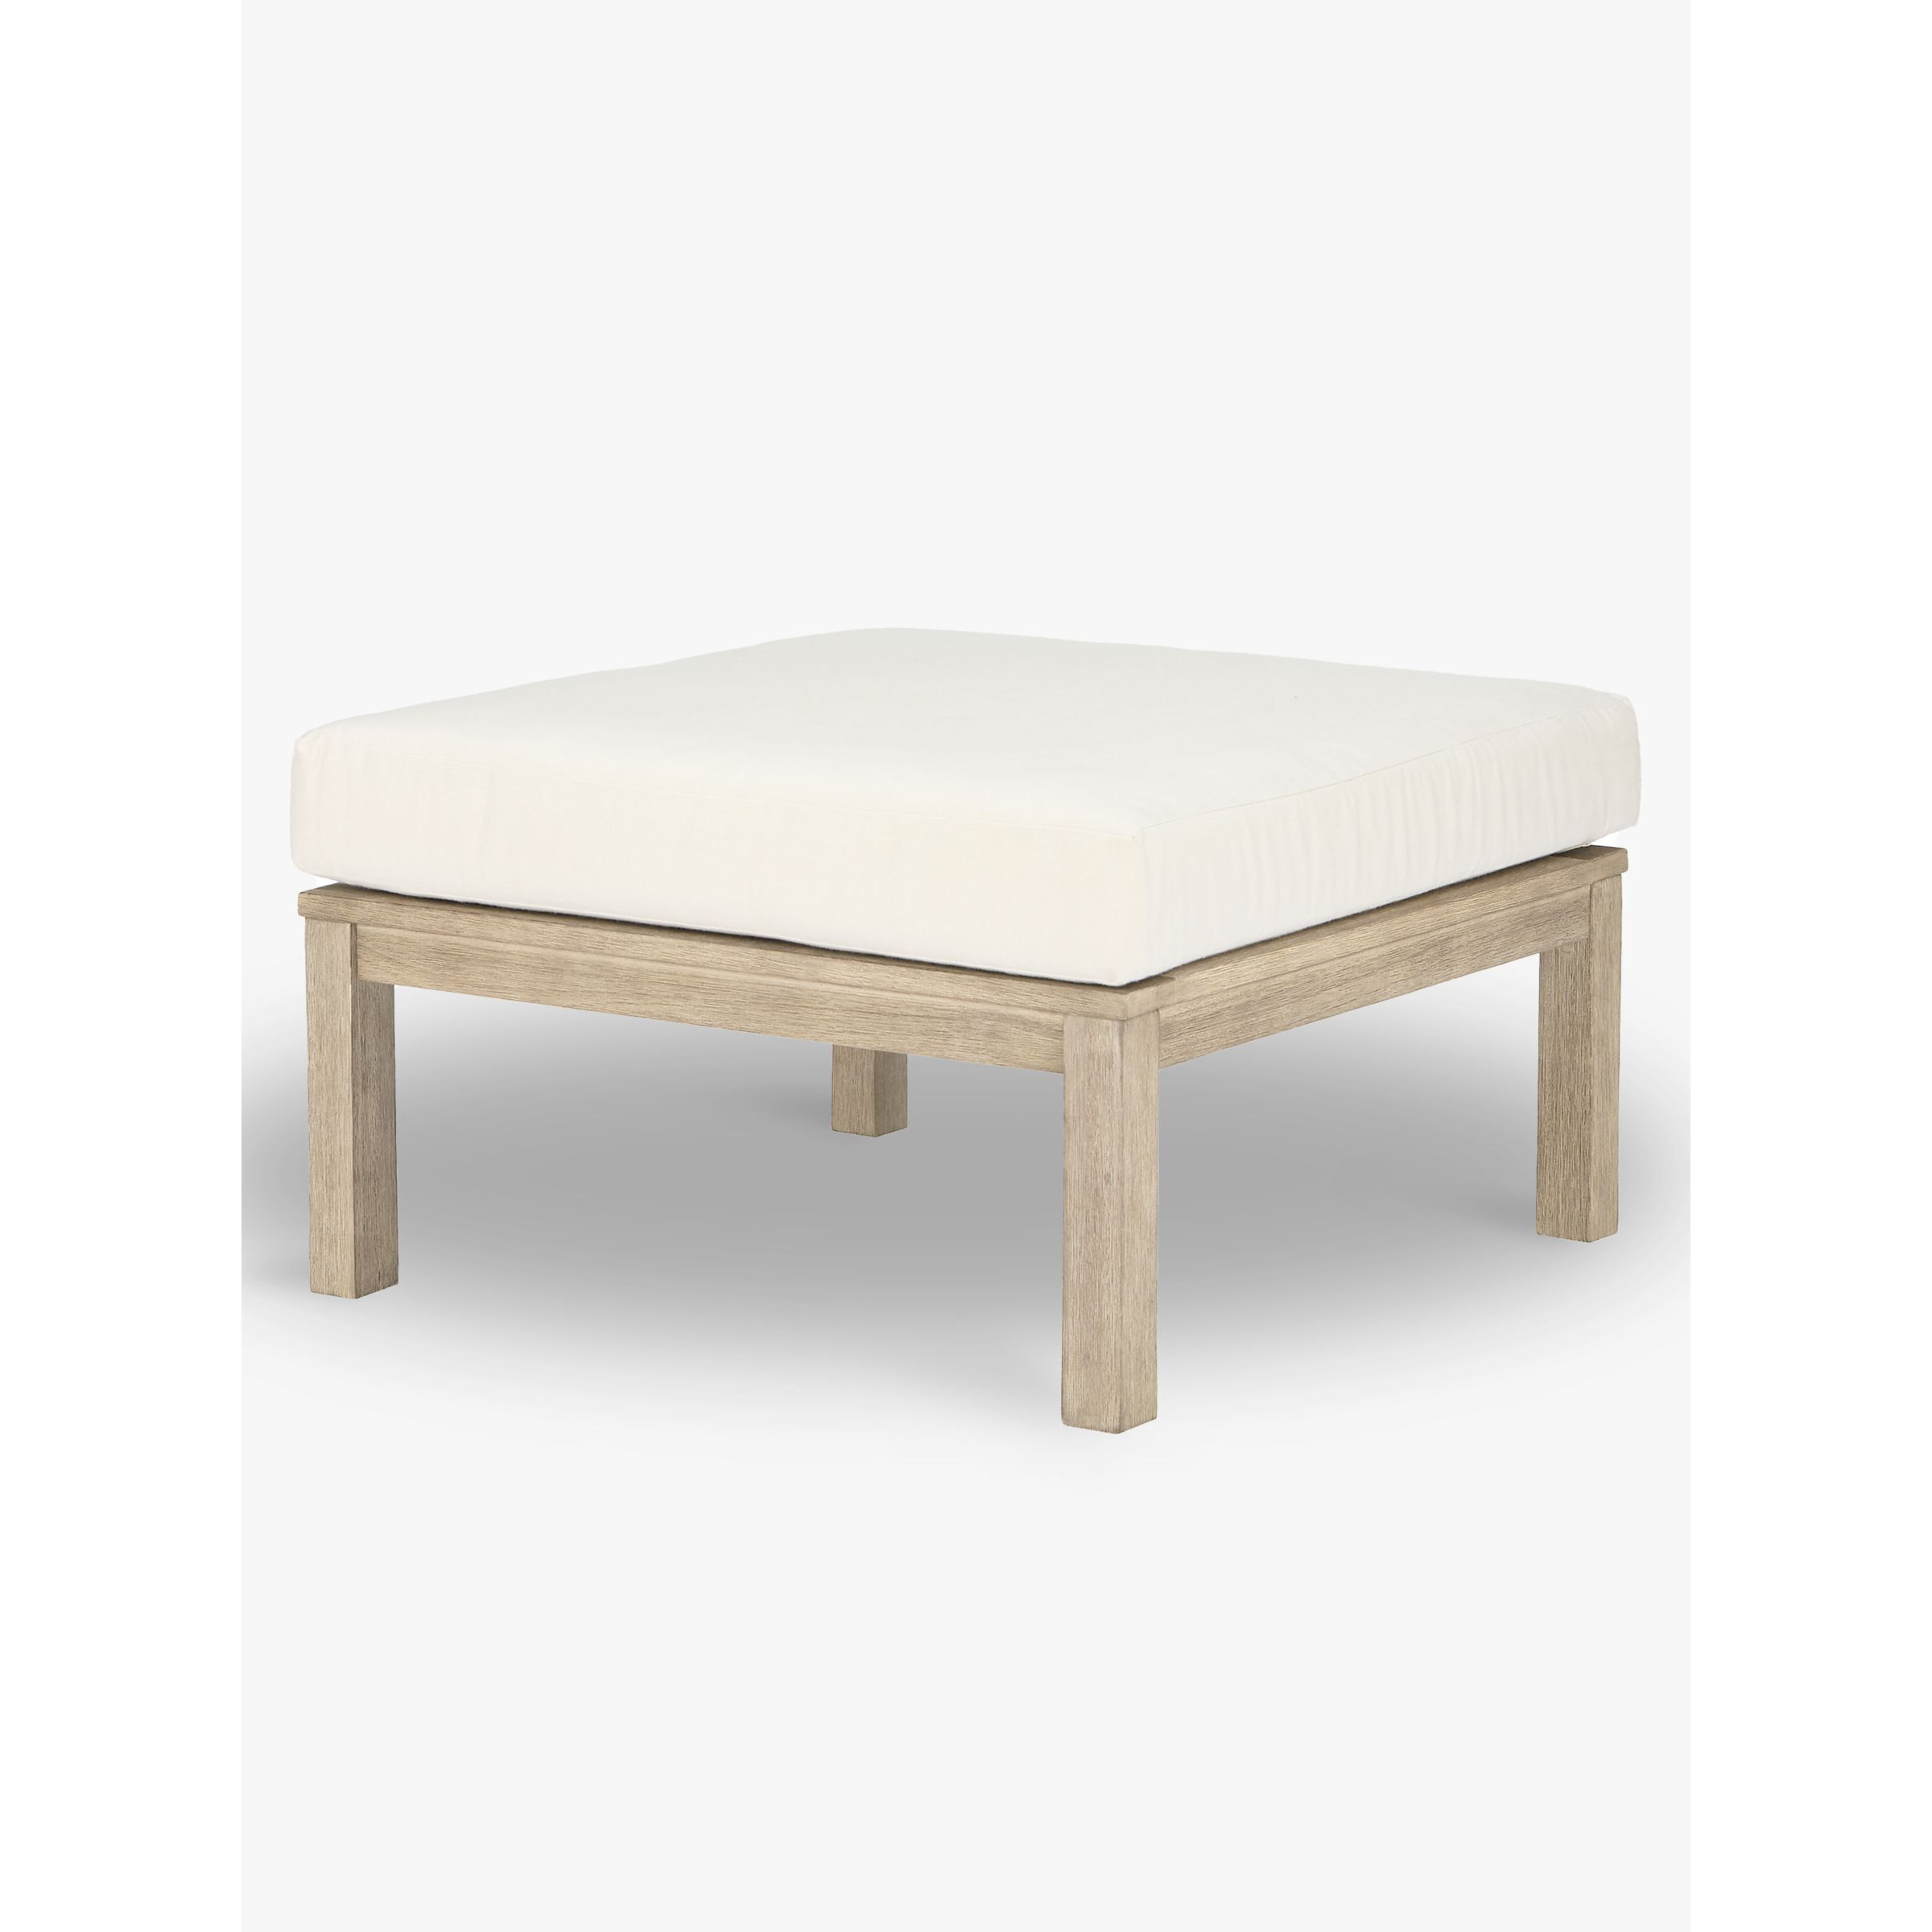 John Lewis St Ives Garden Coffee Table / Foot Stool, FSC-Certified (Eucalyptus Wood), Natural - image 1